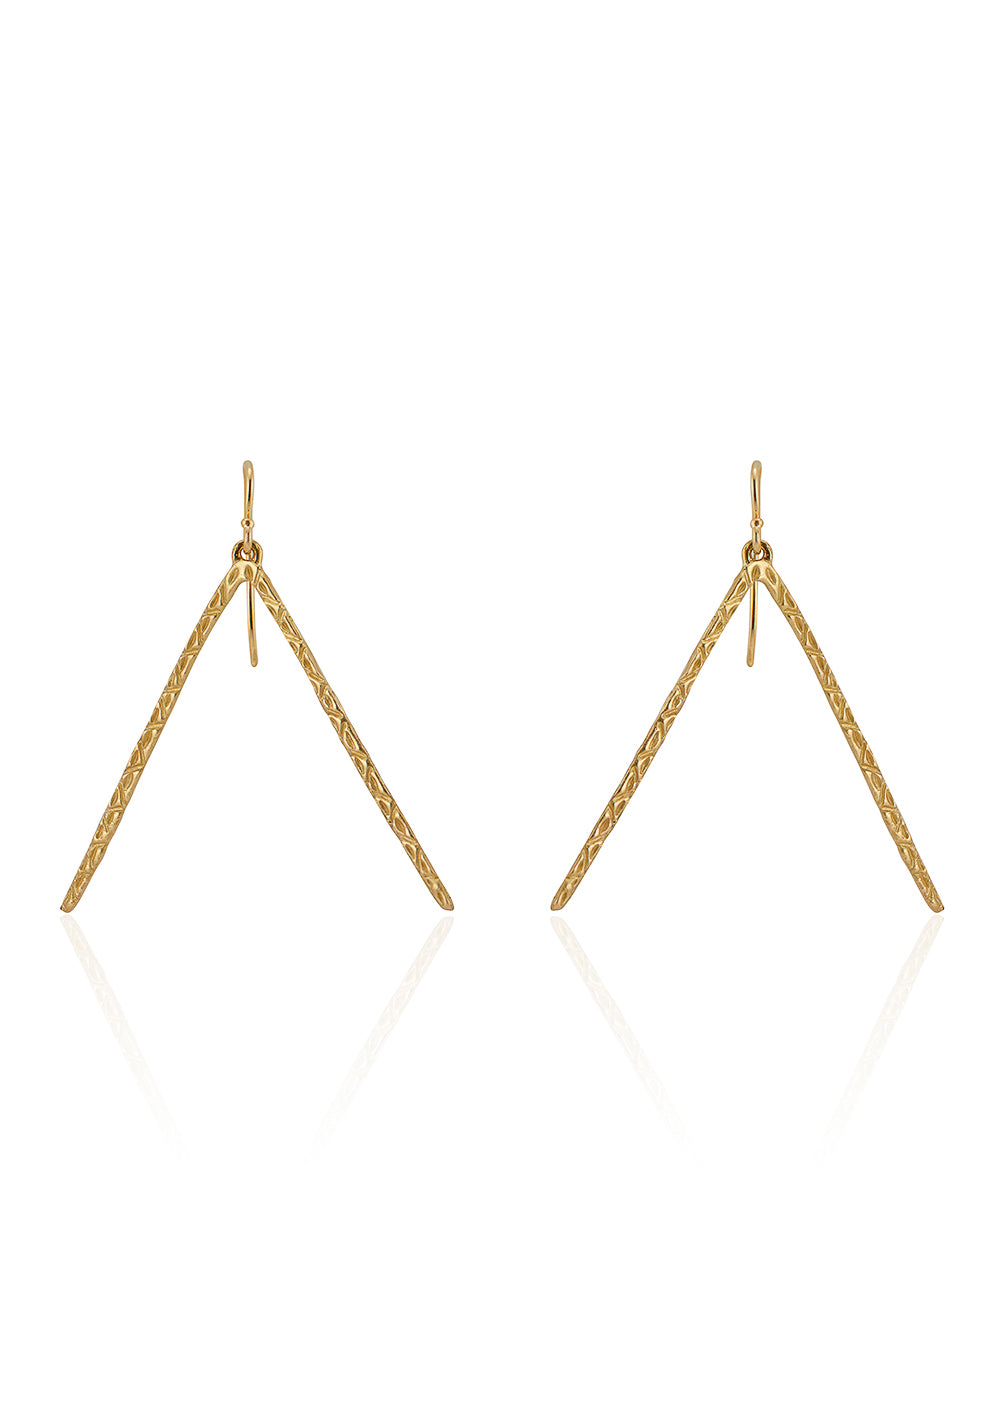 Plucked from Carnaby Street’s glory days and re-imagined with minimalist elegance, the wishbone-shaped Kirby earring is hand-carved into a stunning texture that reflects and refracts light while dangling delicately from the ear—a swinging style worthy of its London roots. 